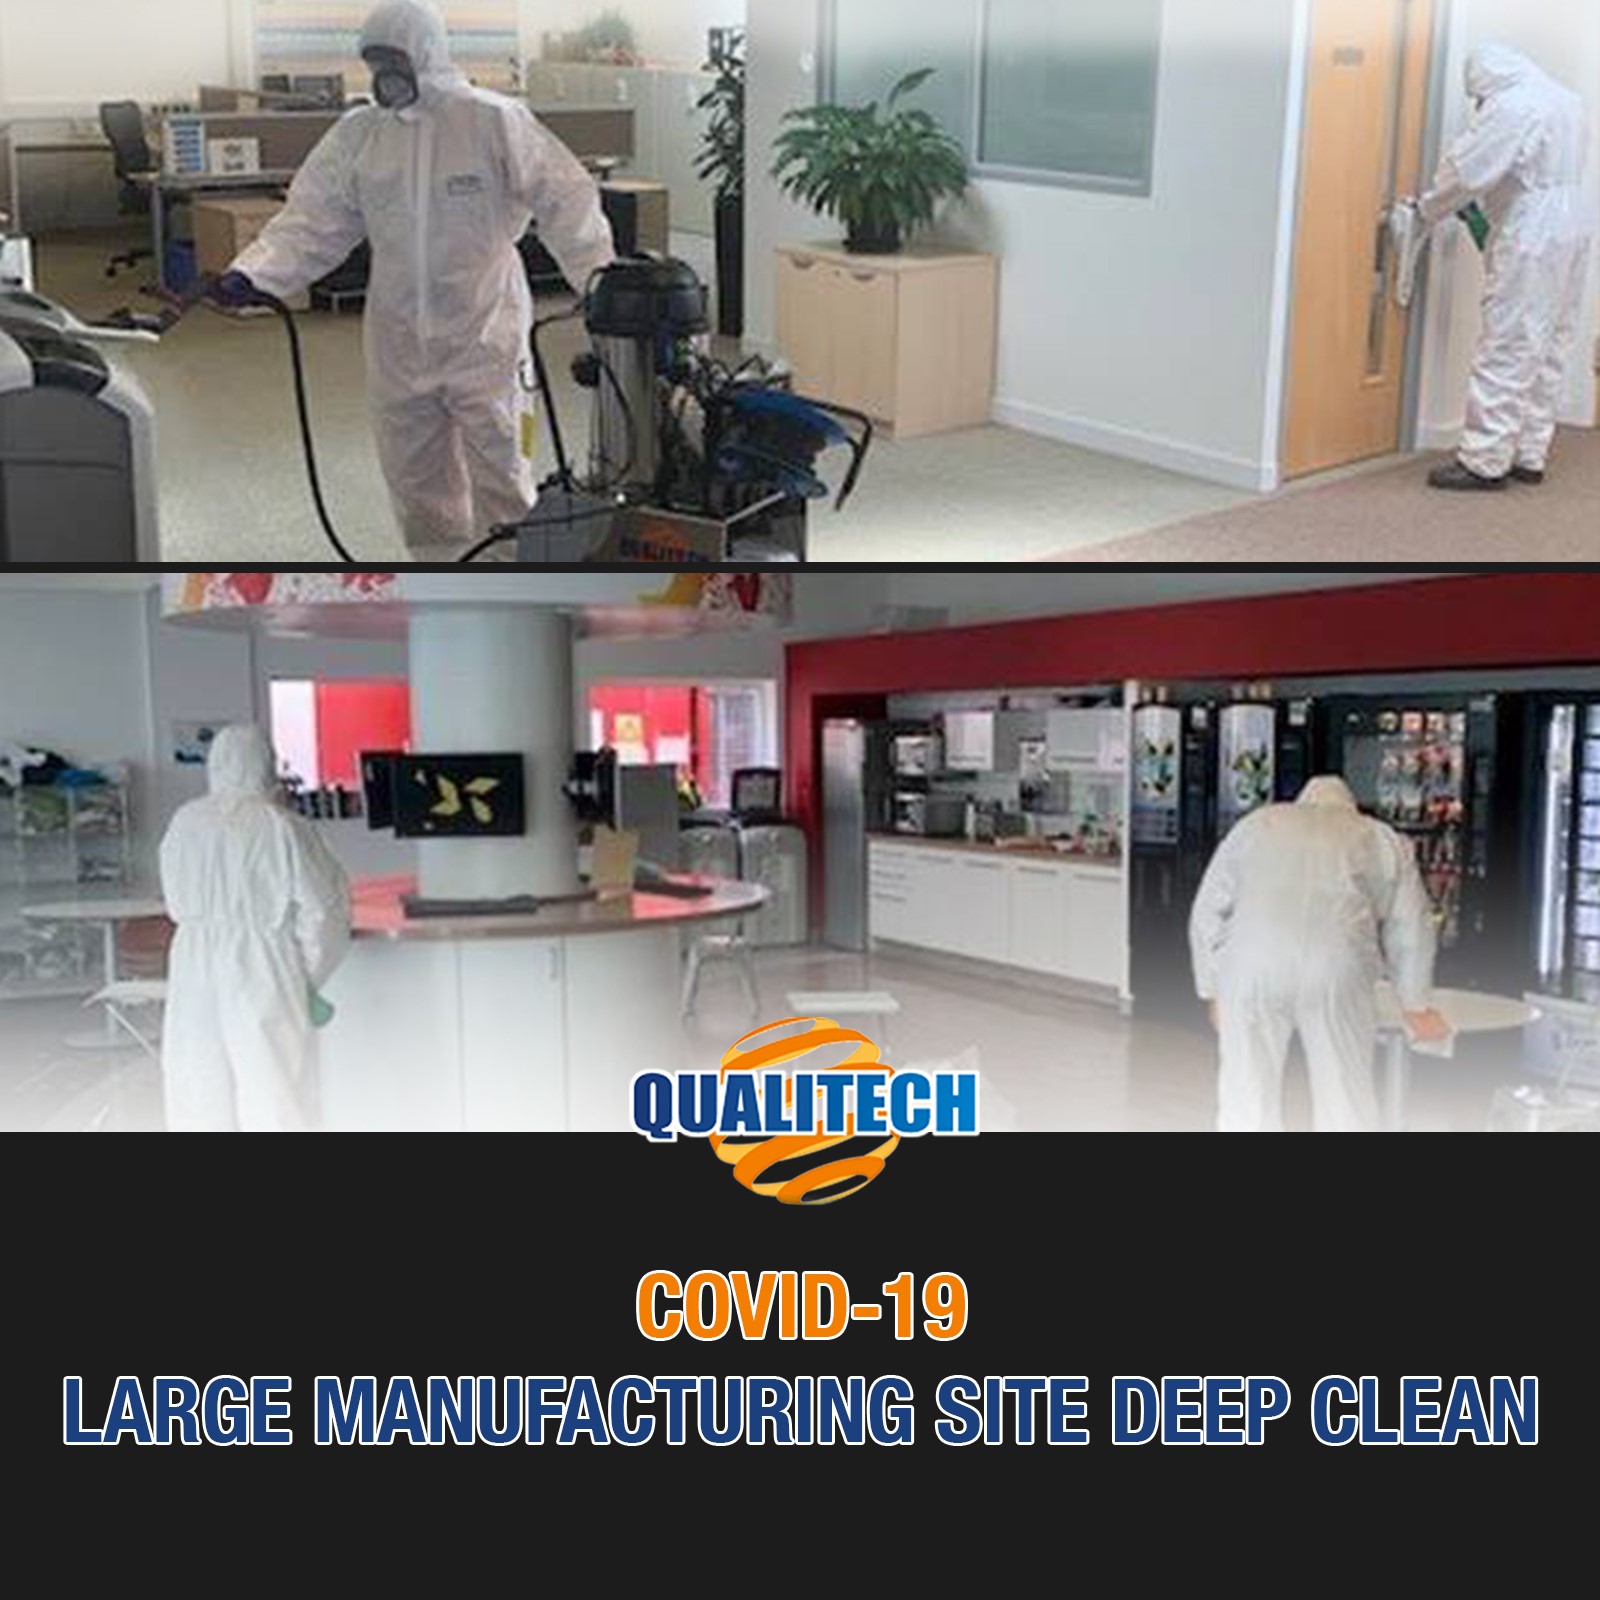 Large Manufacturing deep clean